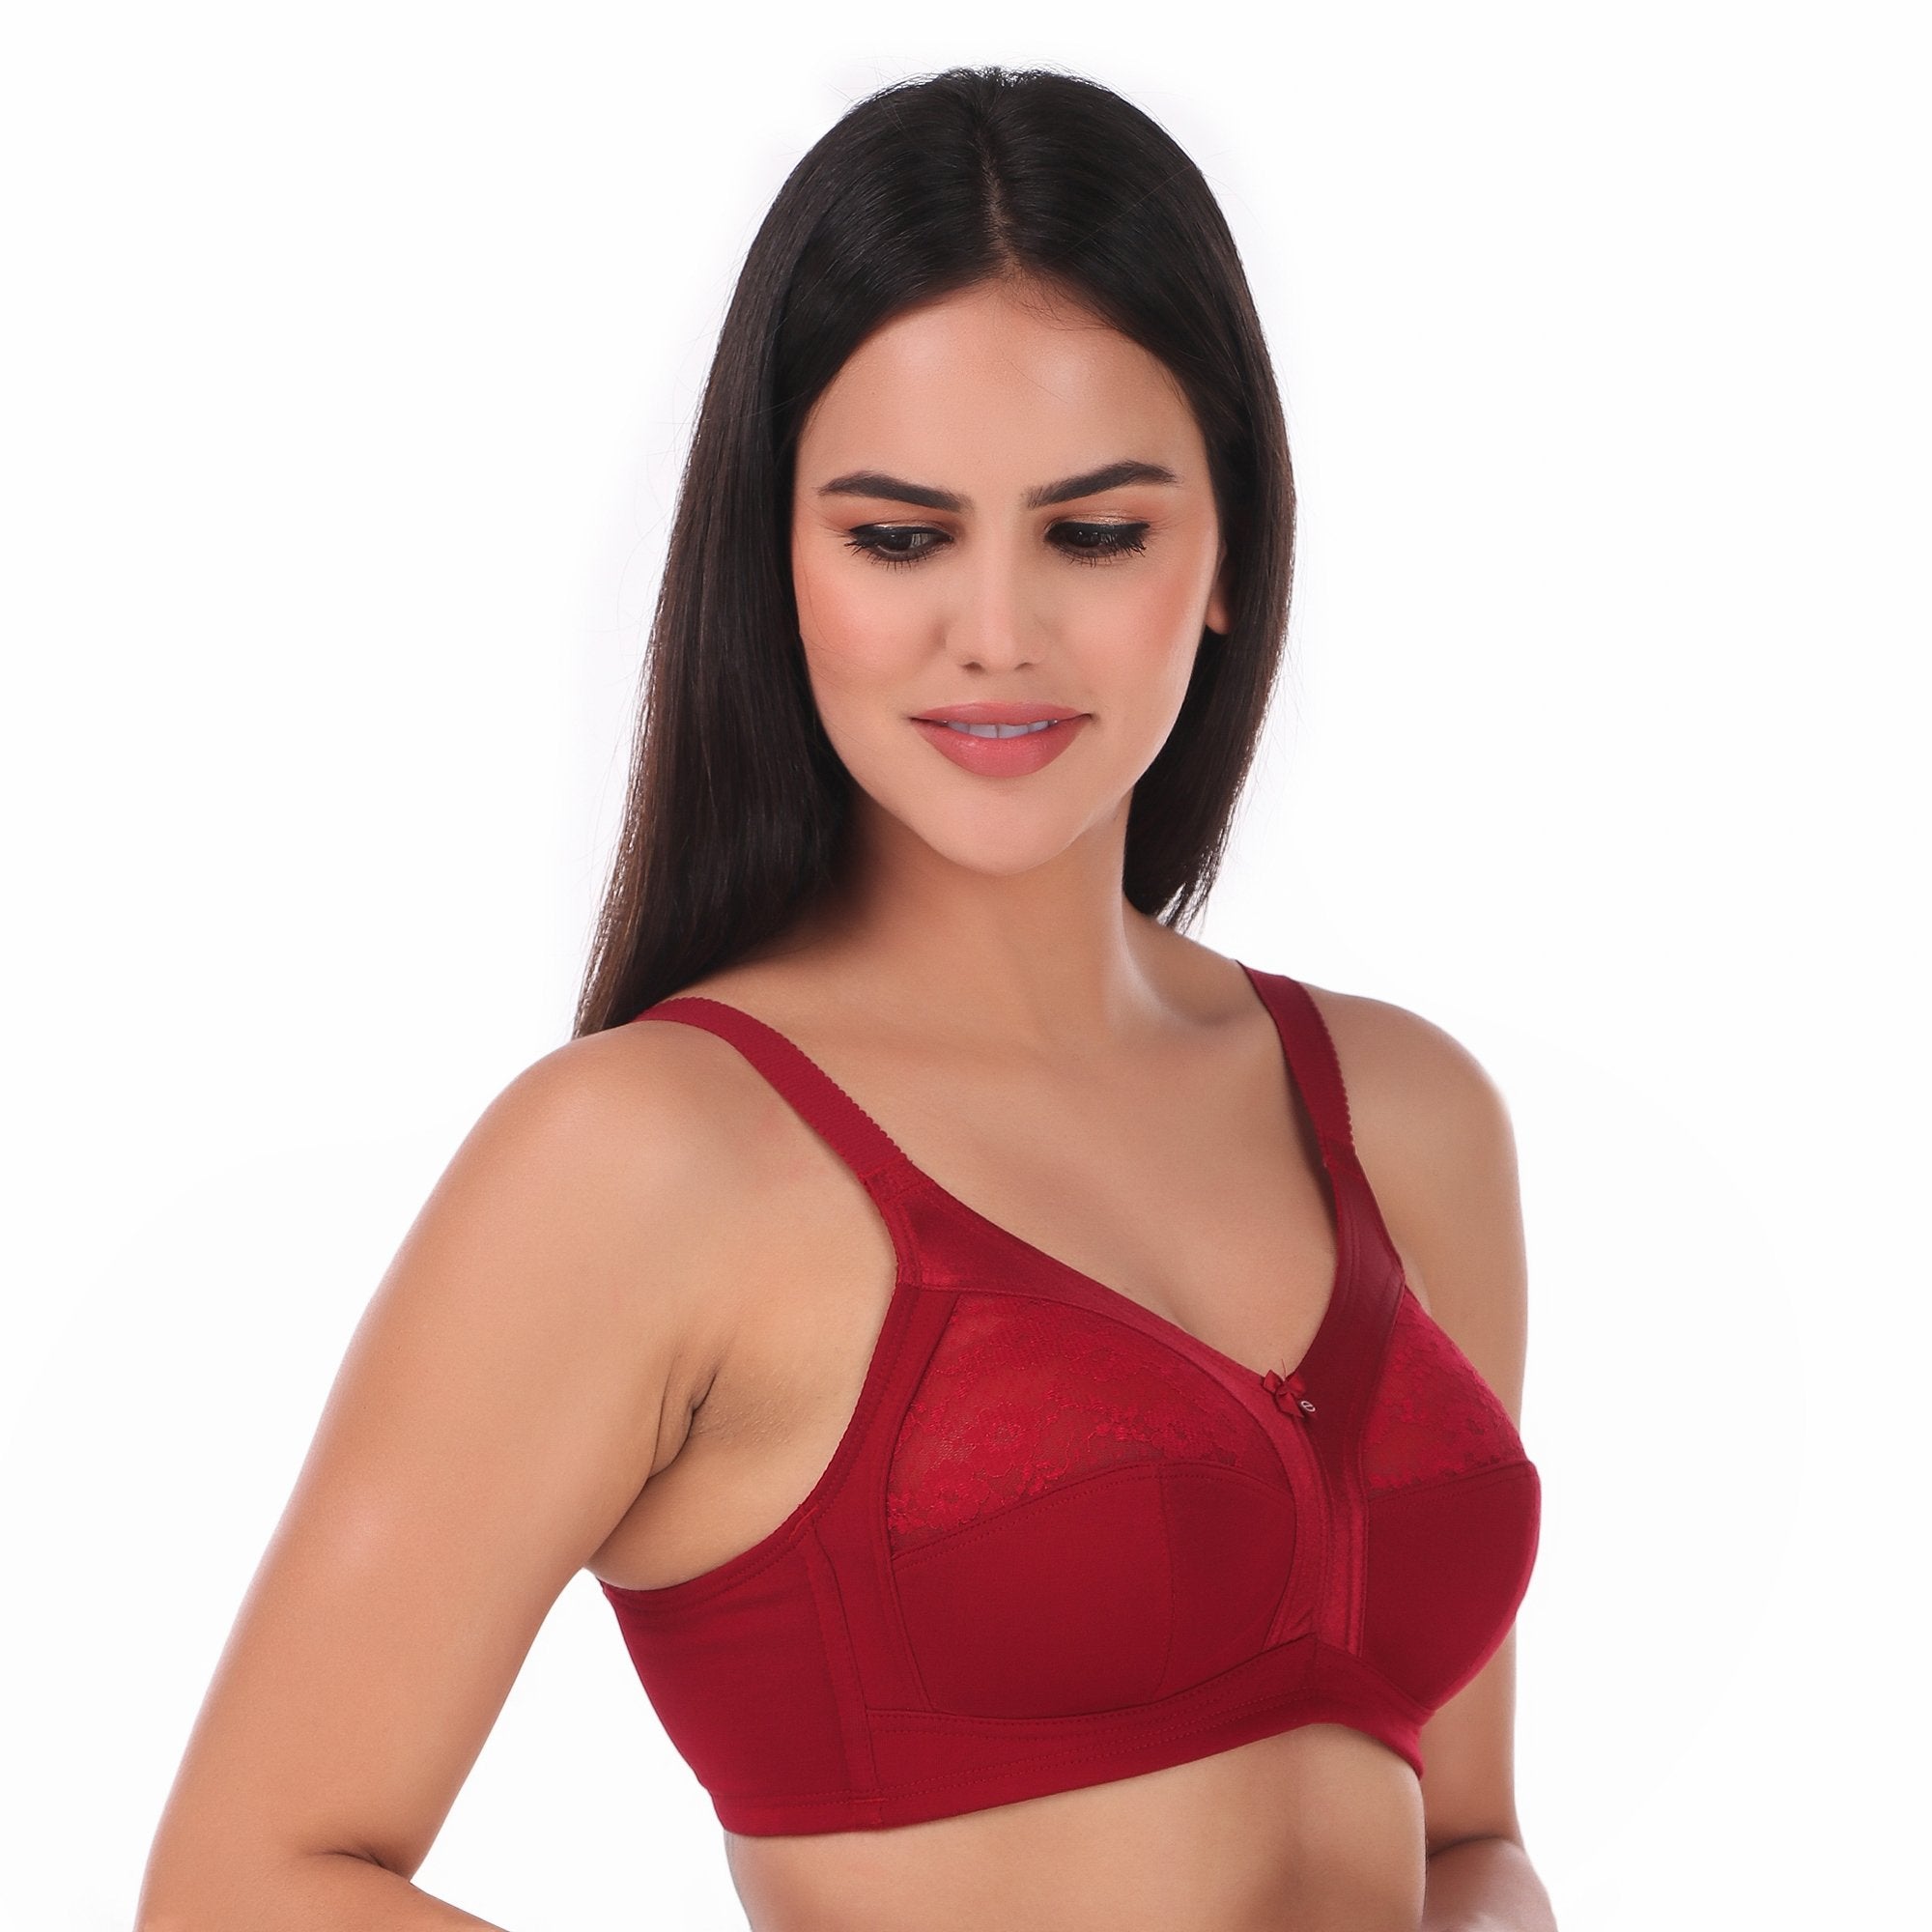 Meesho - Whatsapp -> +919493647258 Catalog Name: *Comfy Stylish Polyster & Cotton  Bra Vol 4* Fabric: Polyester & Cotton Sleeves: Sleeves Are Not Included  Size: 32B: Cup Size - Underbust - 27